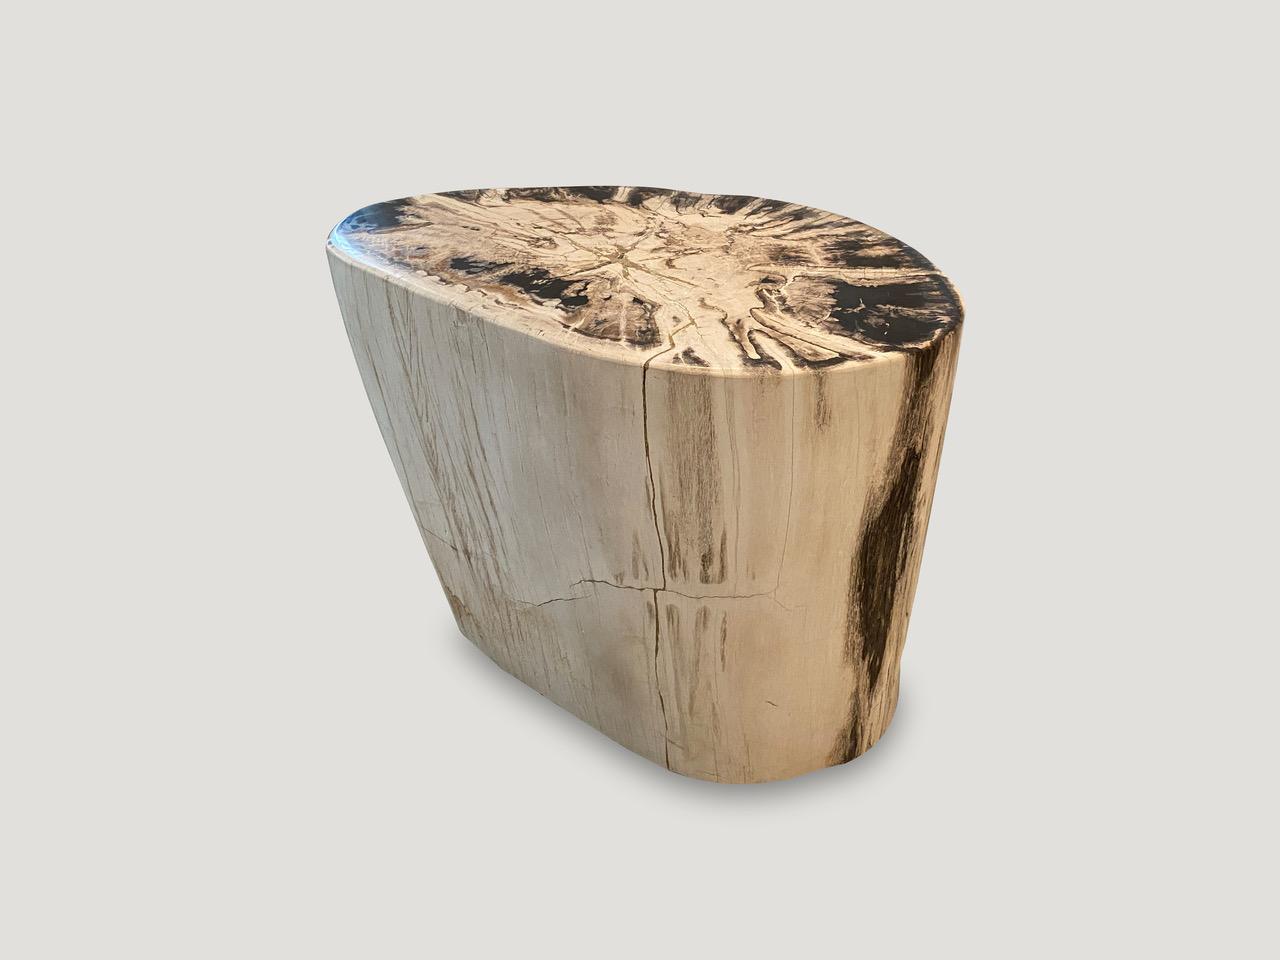 Impressive over sized high quality petrified wood side table with dramatic contrasting tones. It’s fascinating how Mother Nature produces these stunning 40 million year old petrified teak logs with such contrasting colors with natural patterns